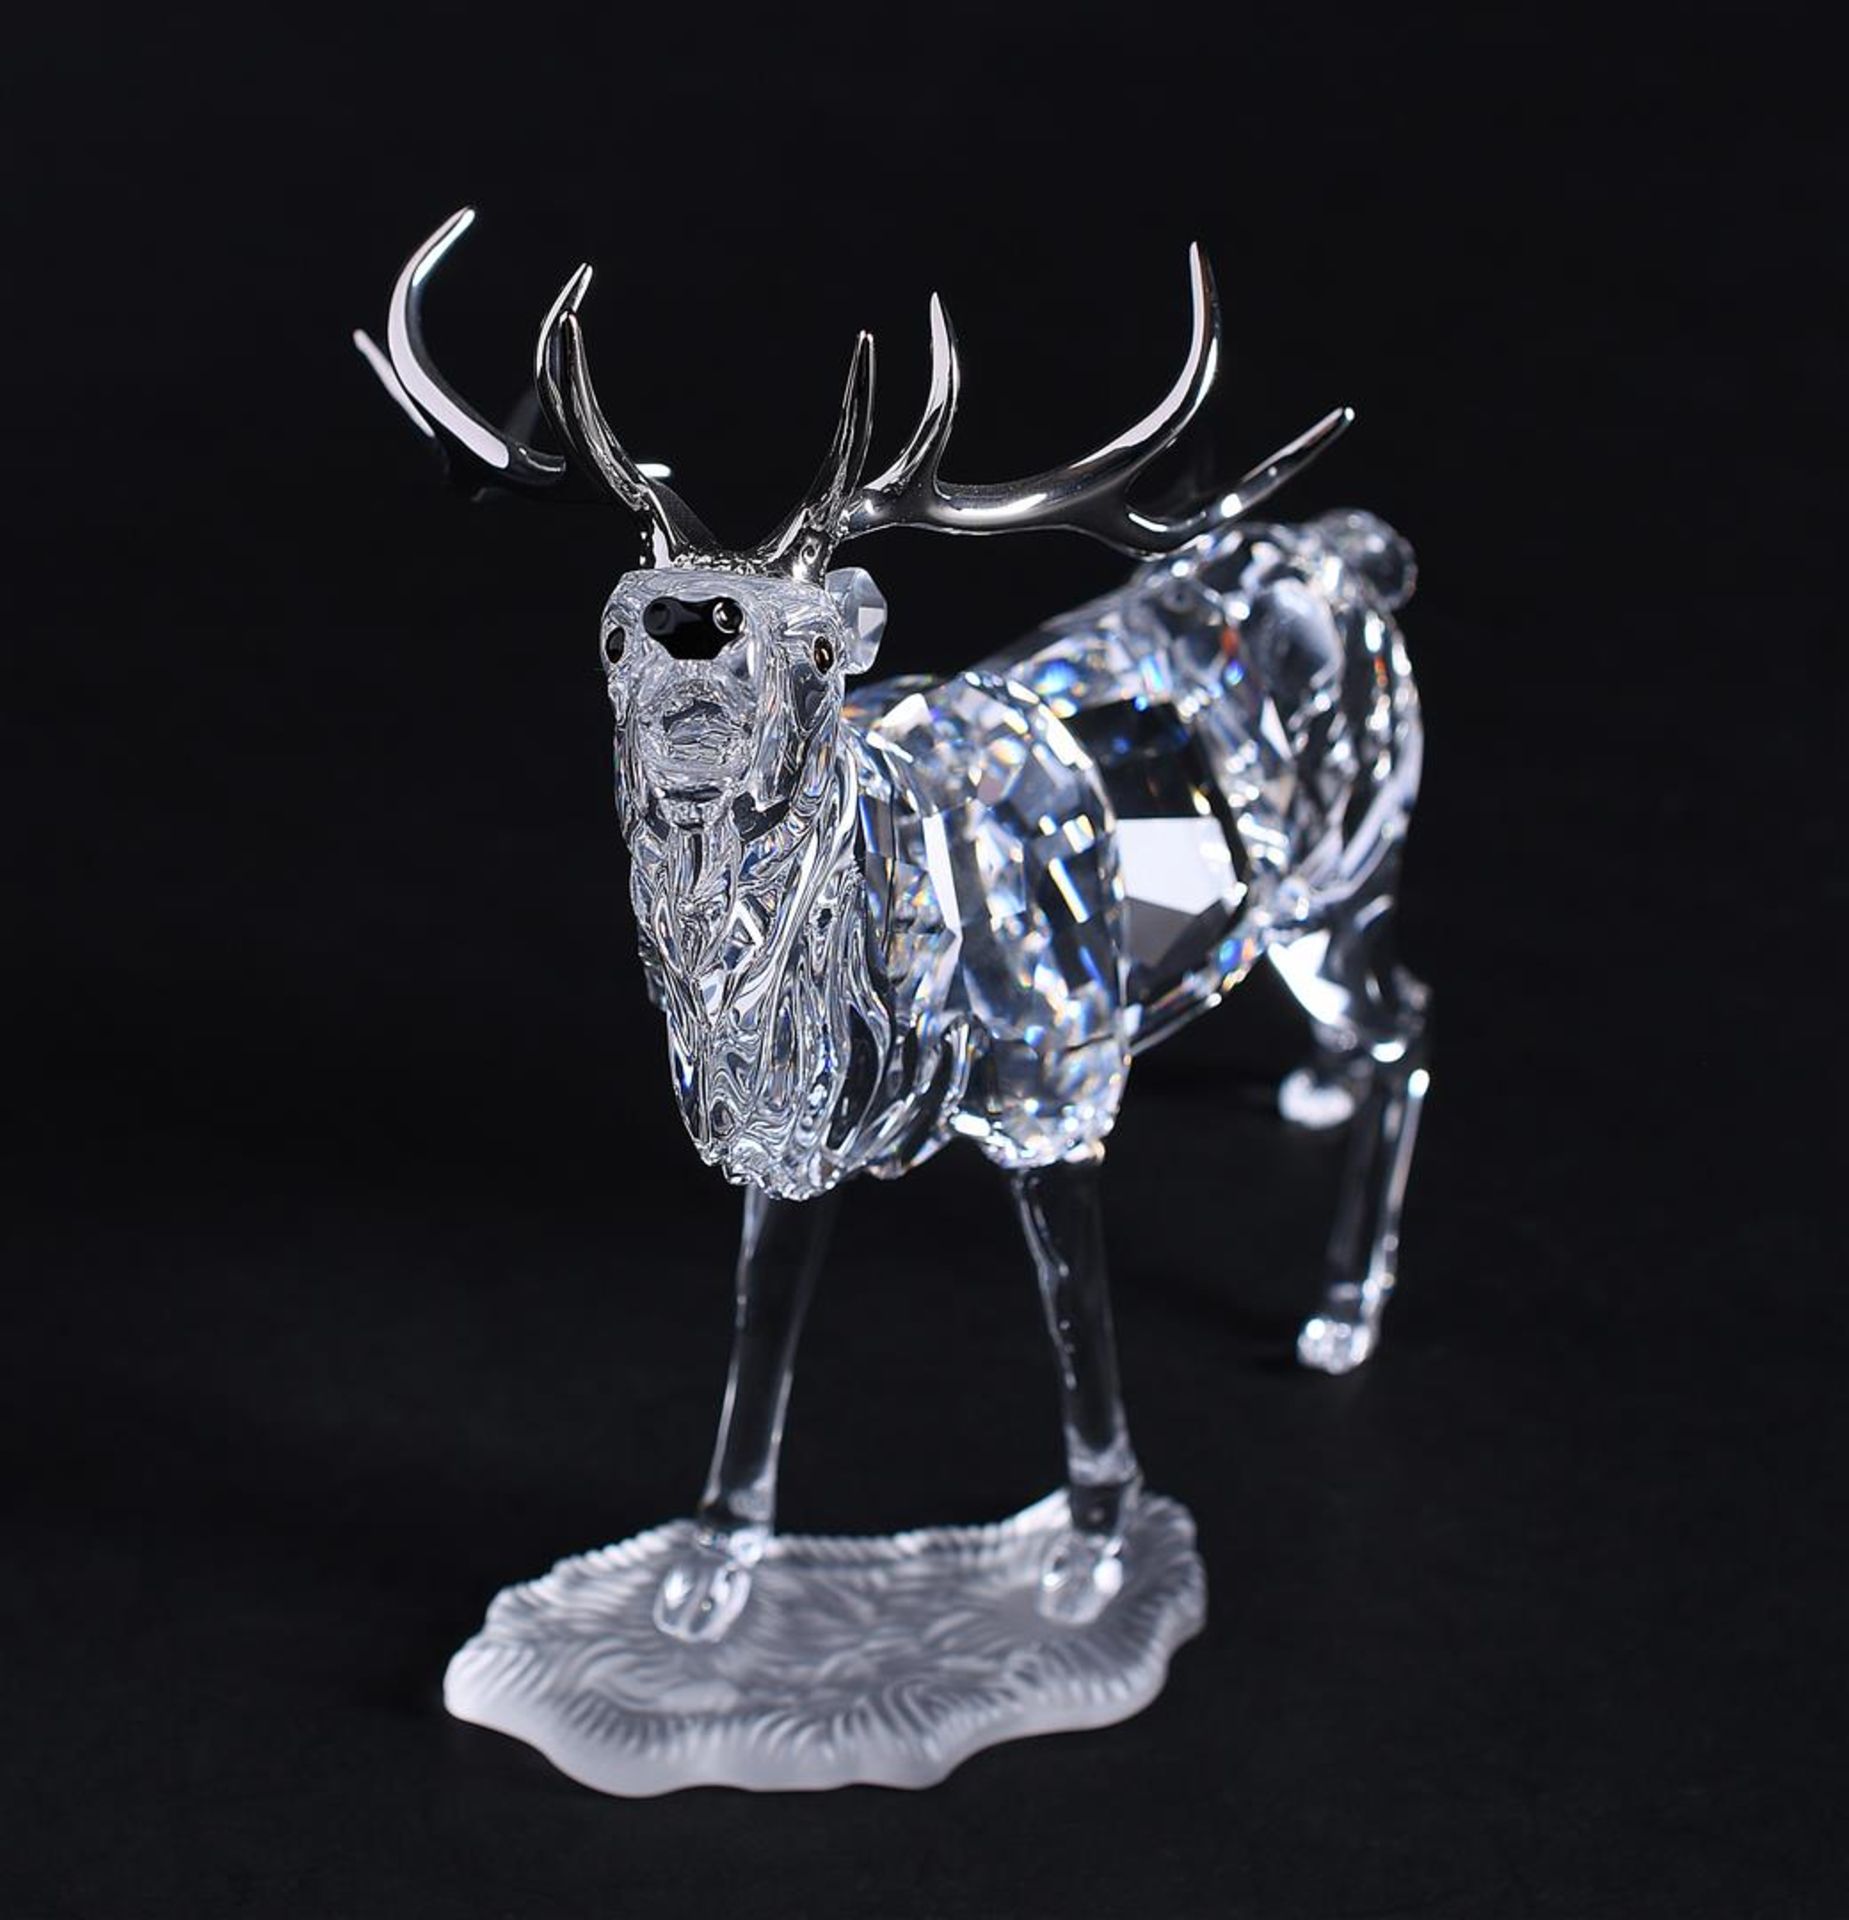 Swarovski, Deer Buck, Year of issue 2002,291431. Includes original box and glass shoe.
17,8 x 13,9 c - Image 2 of 4